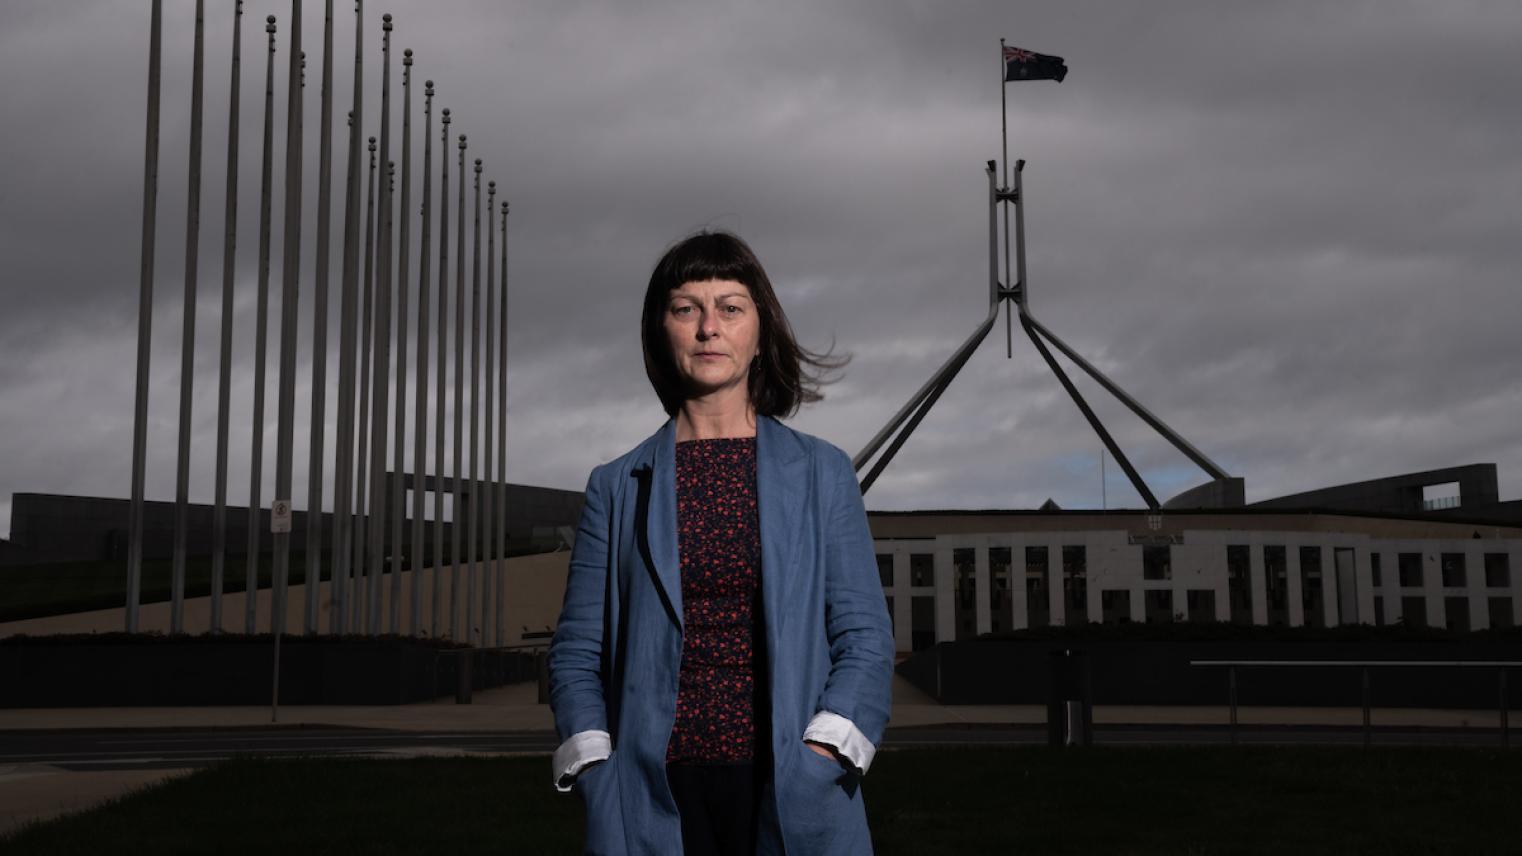 Professor Sharon Friel at Parliament House in Canberra ahead of releasing a health equity report card. Photo: Tracey Nearmy/ANU